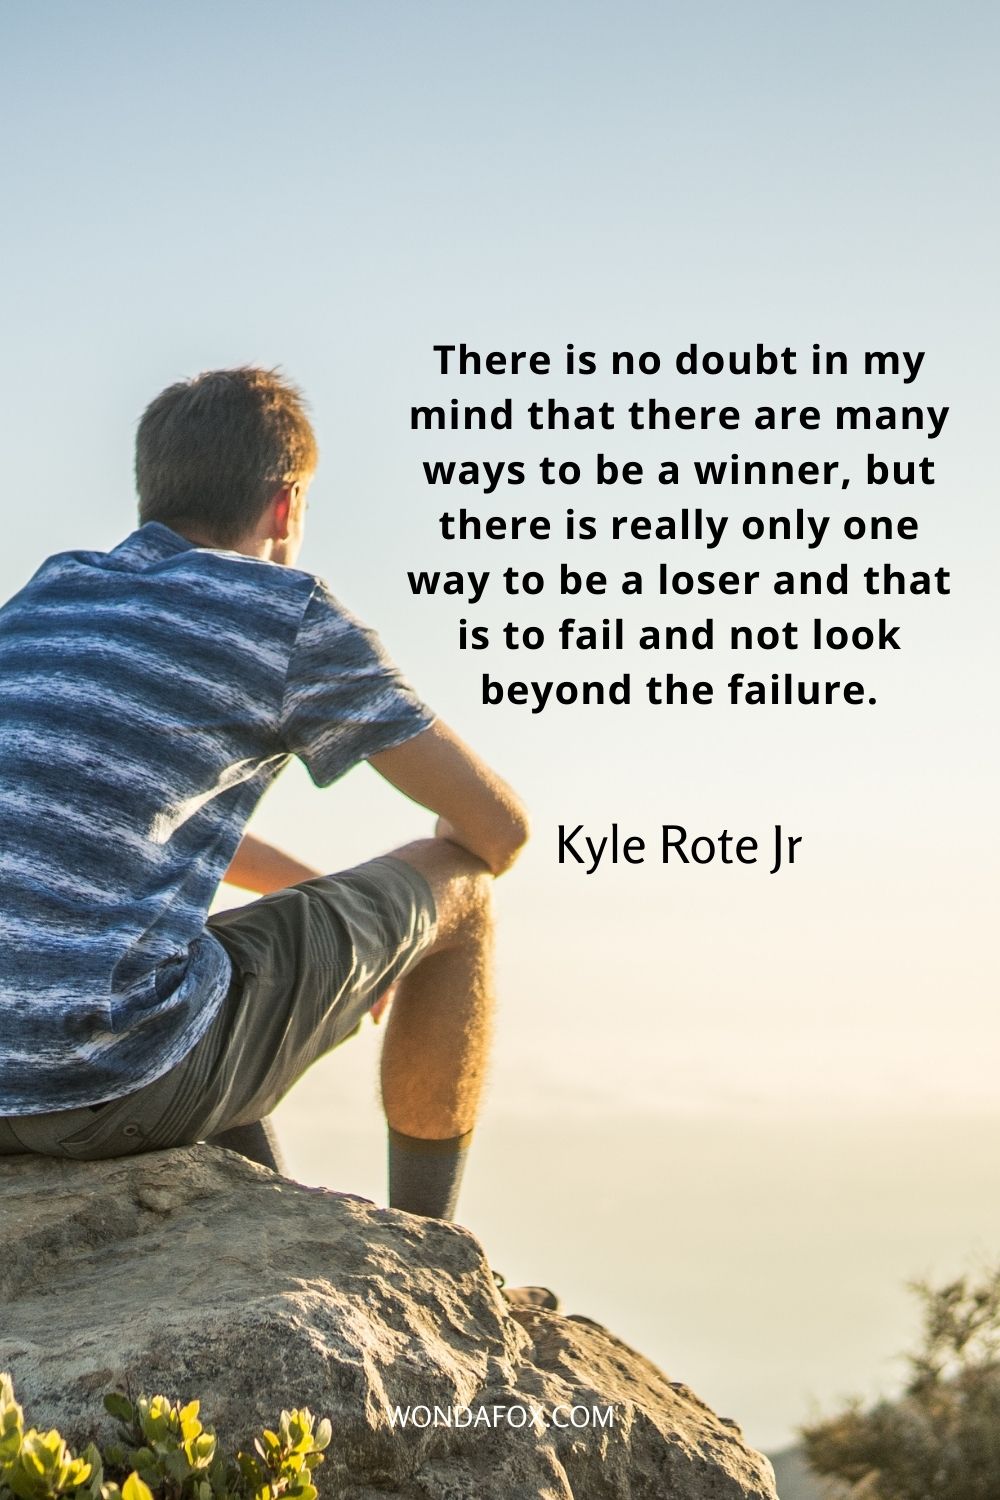 There is no doubt in my mind that there are many ways to be a winner, but there is really only one way to be a loser and that is to fail and not look beyond the failure.